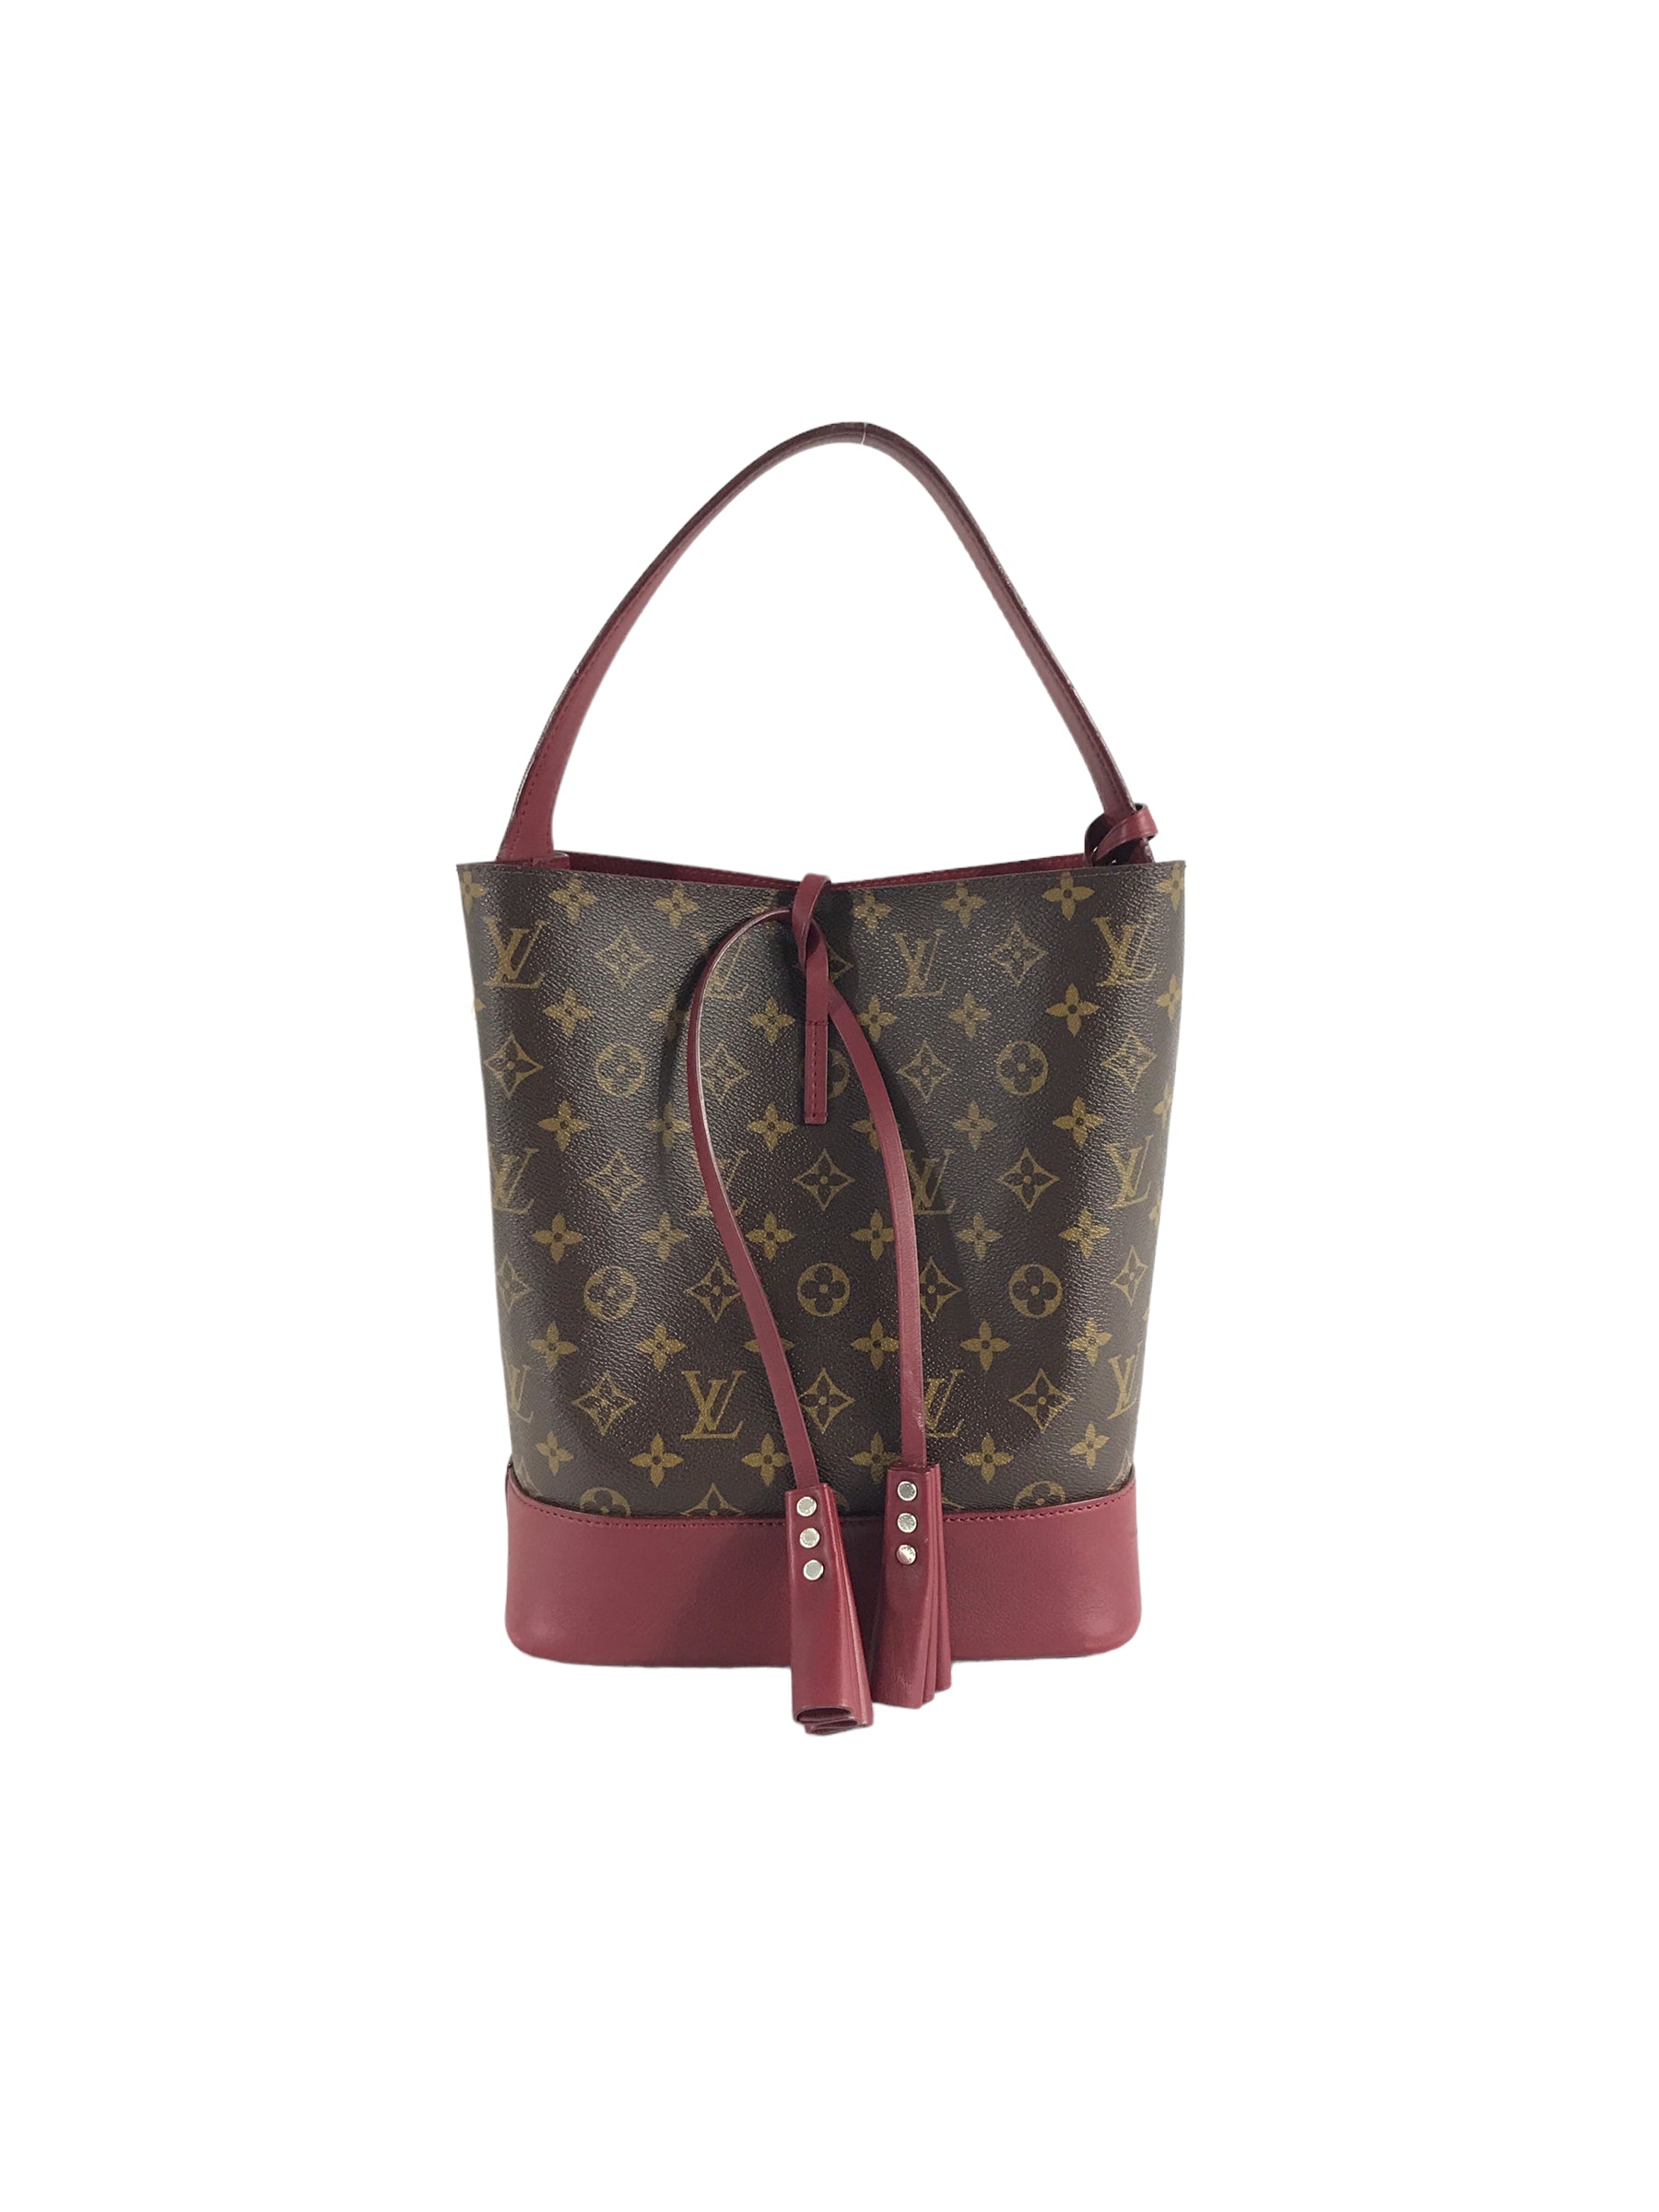 Monogram Coated Canvas/ Burgundy Leather Bucket Shoulder Bag w/ removable pouch w/RHW